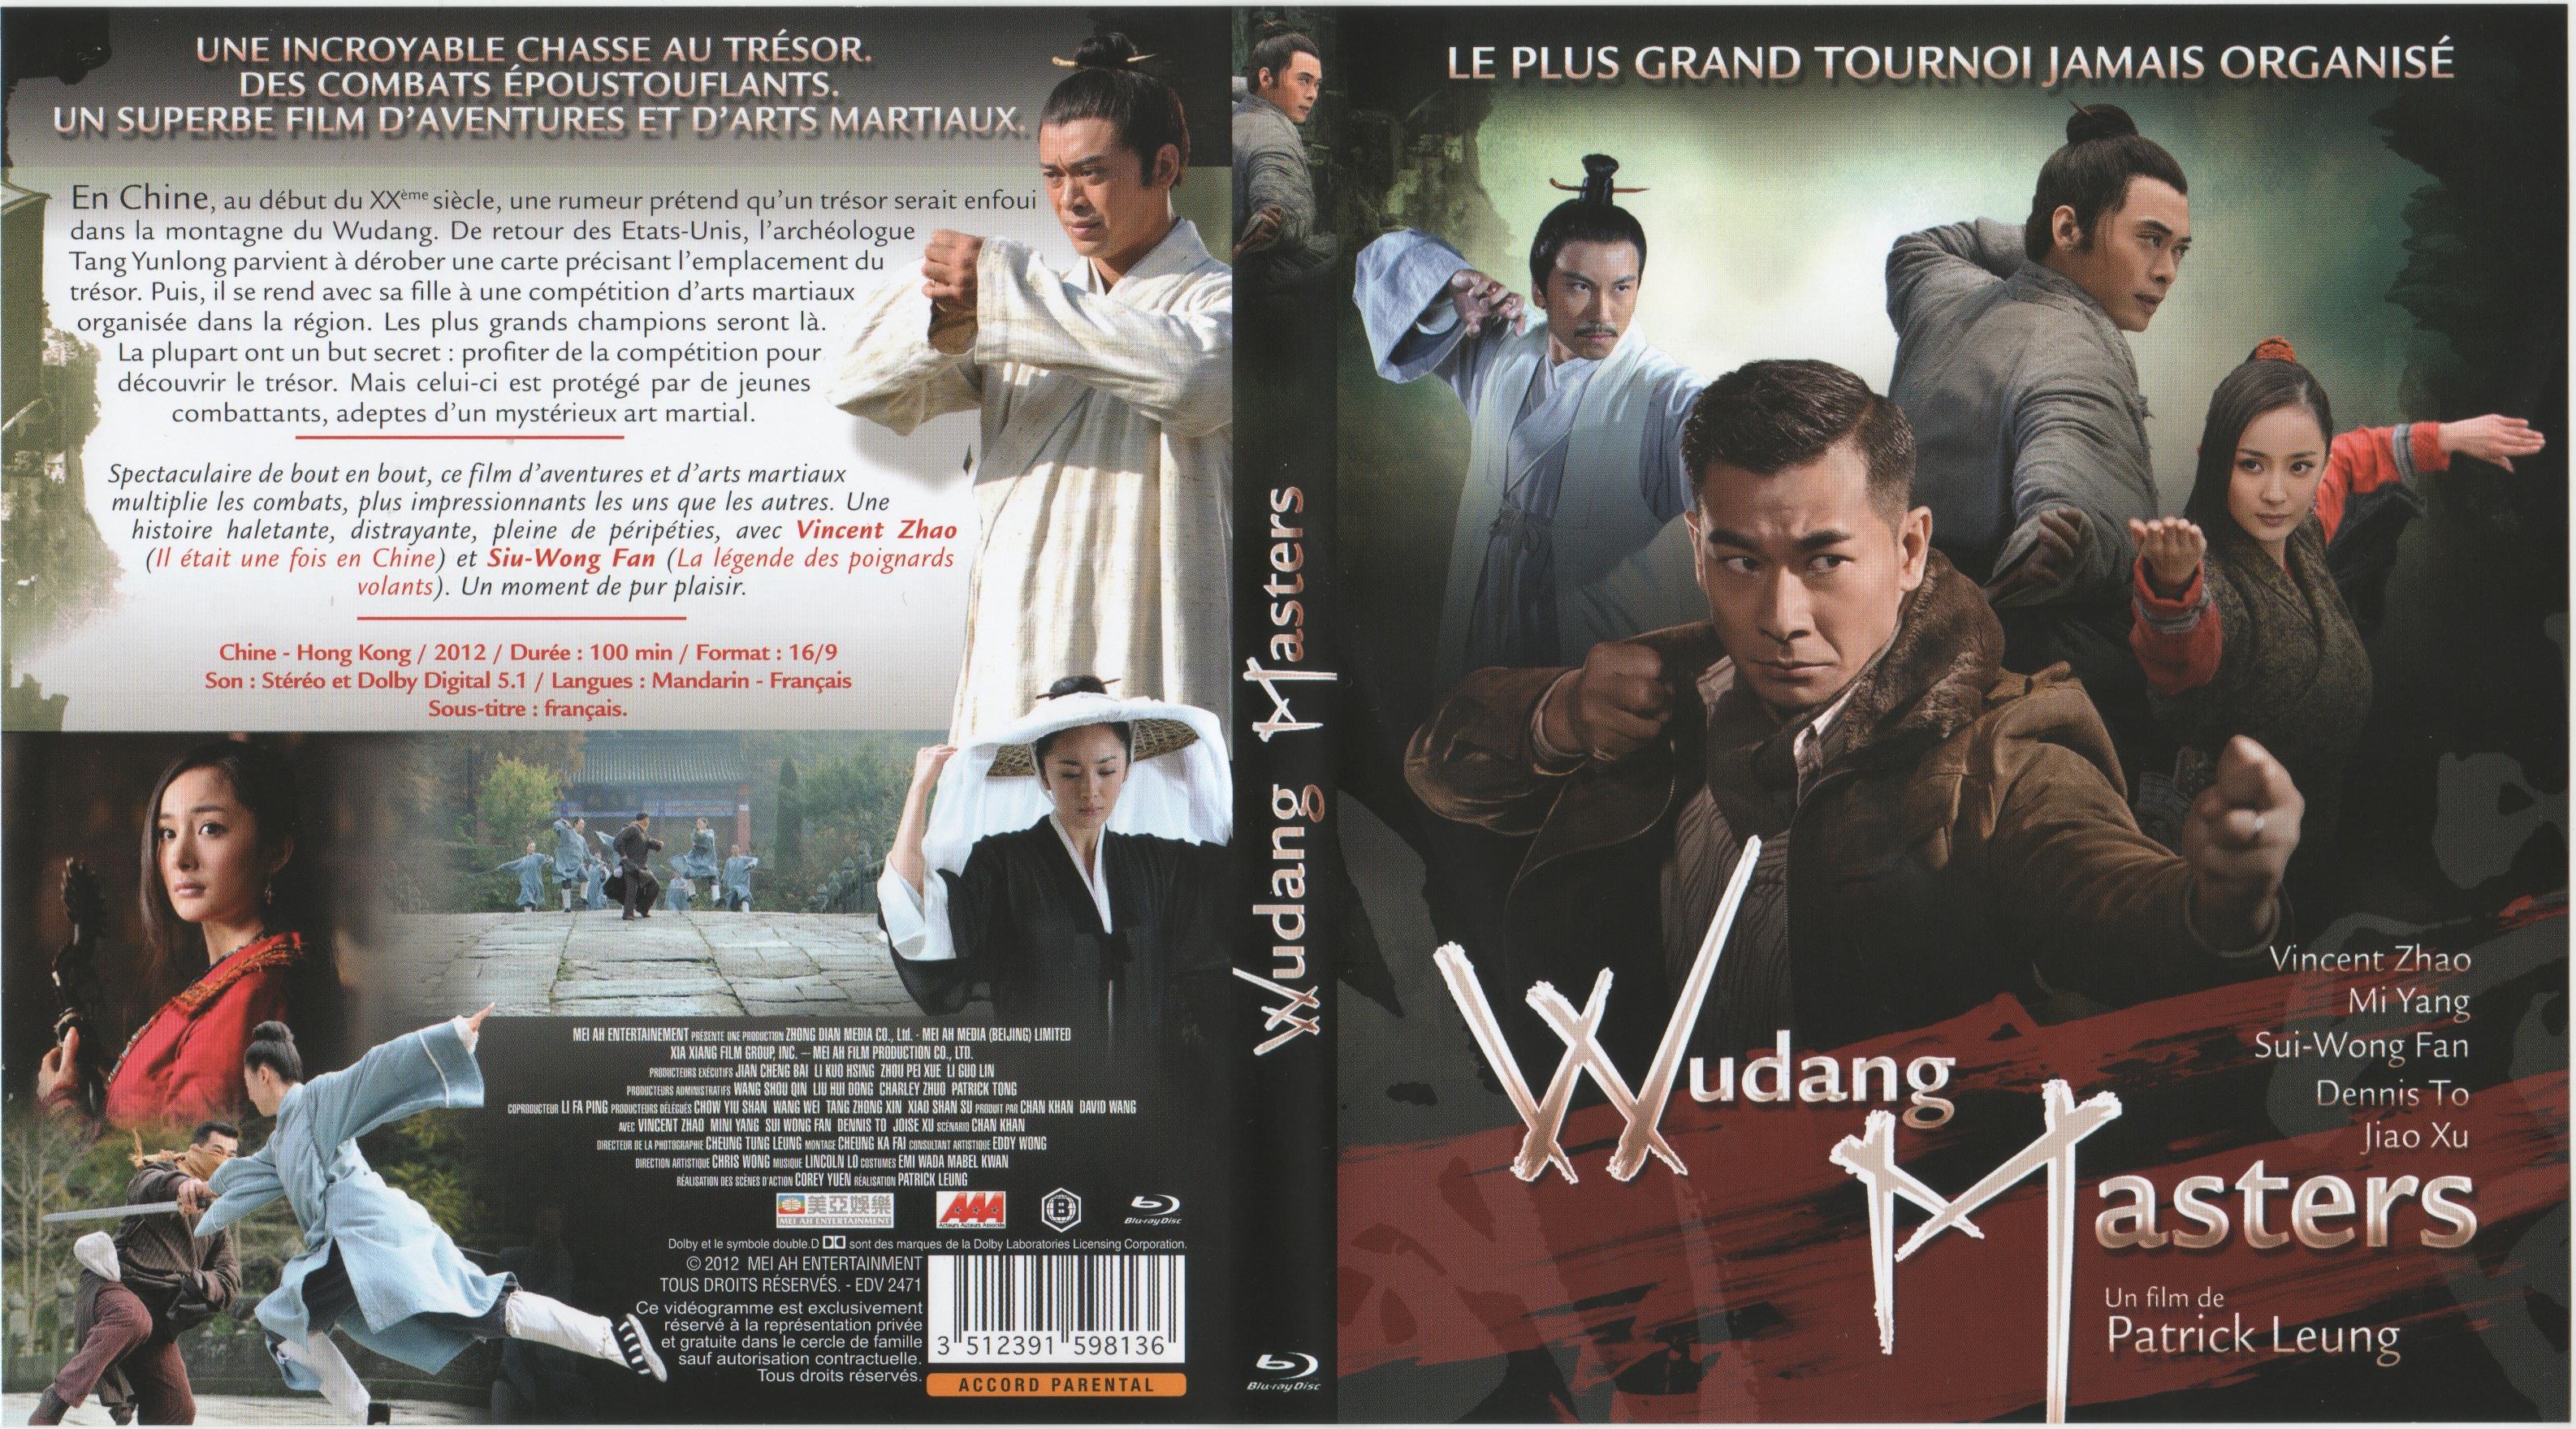 Jaquette DVD Wudang Masters (BLU-RAY)